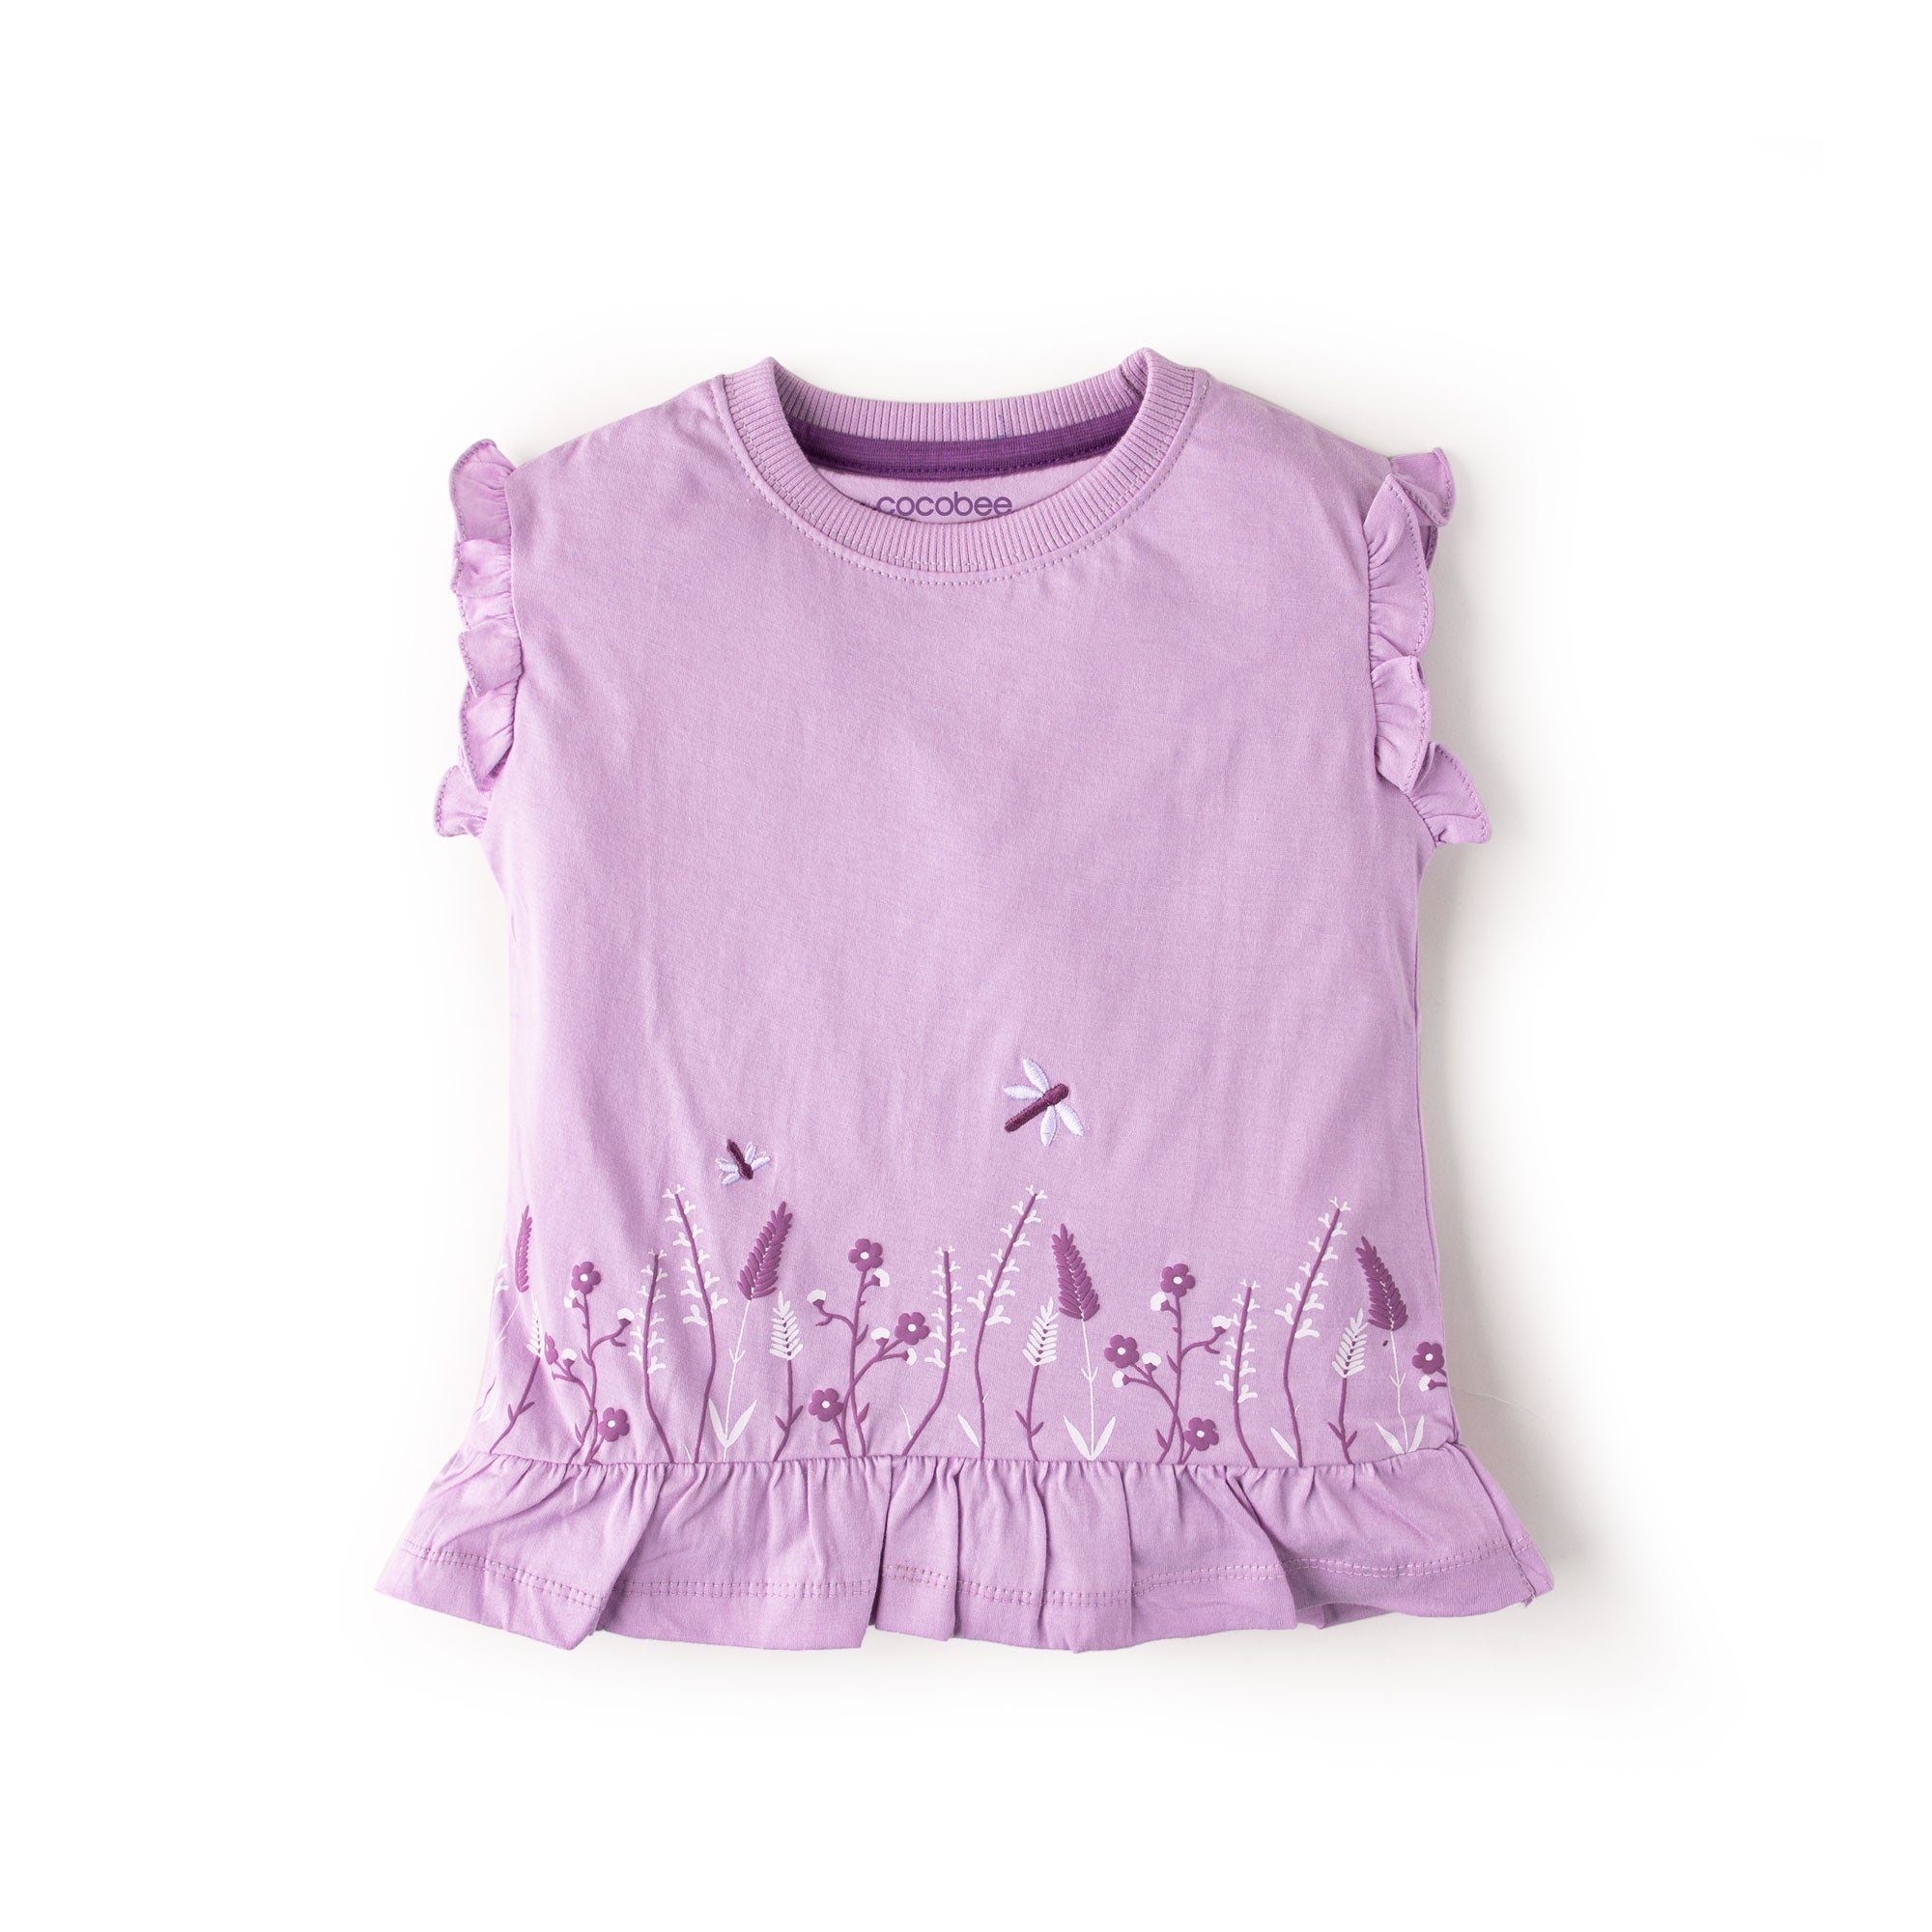 Embroidered Ruffled top